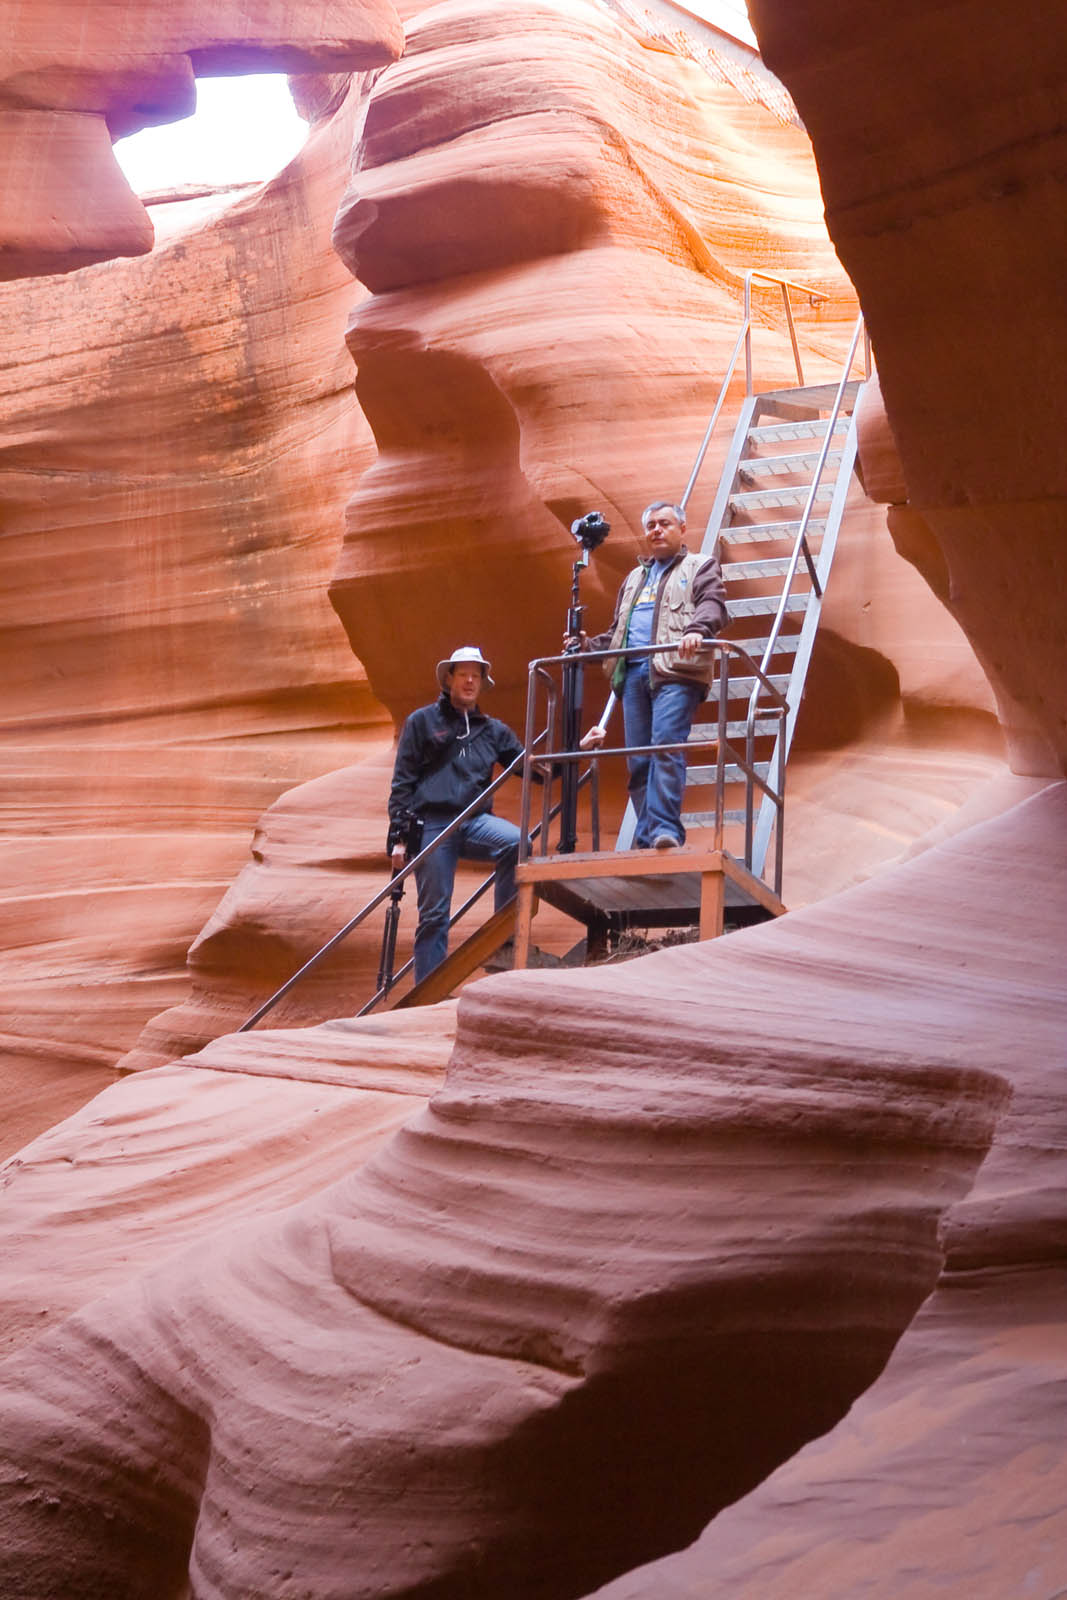 Matthias Taugwalder and Carlos Chegado on the stairs at the end of Lower Antelope Canyon